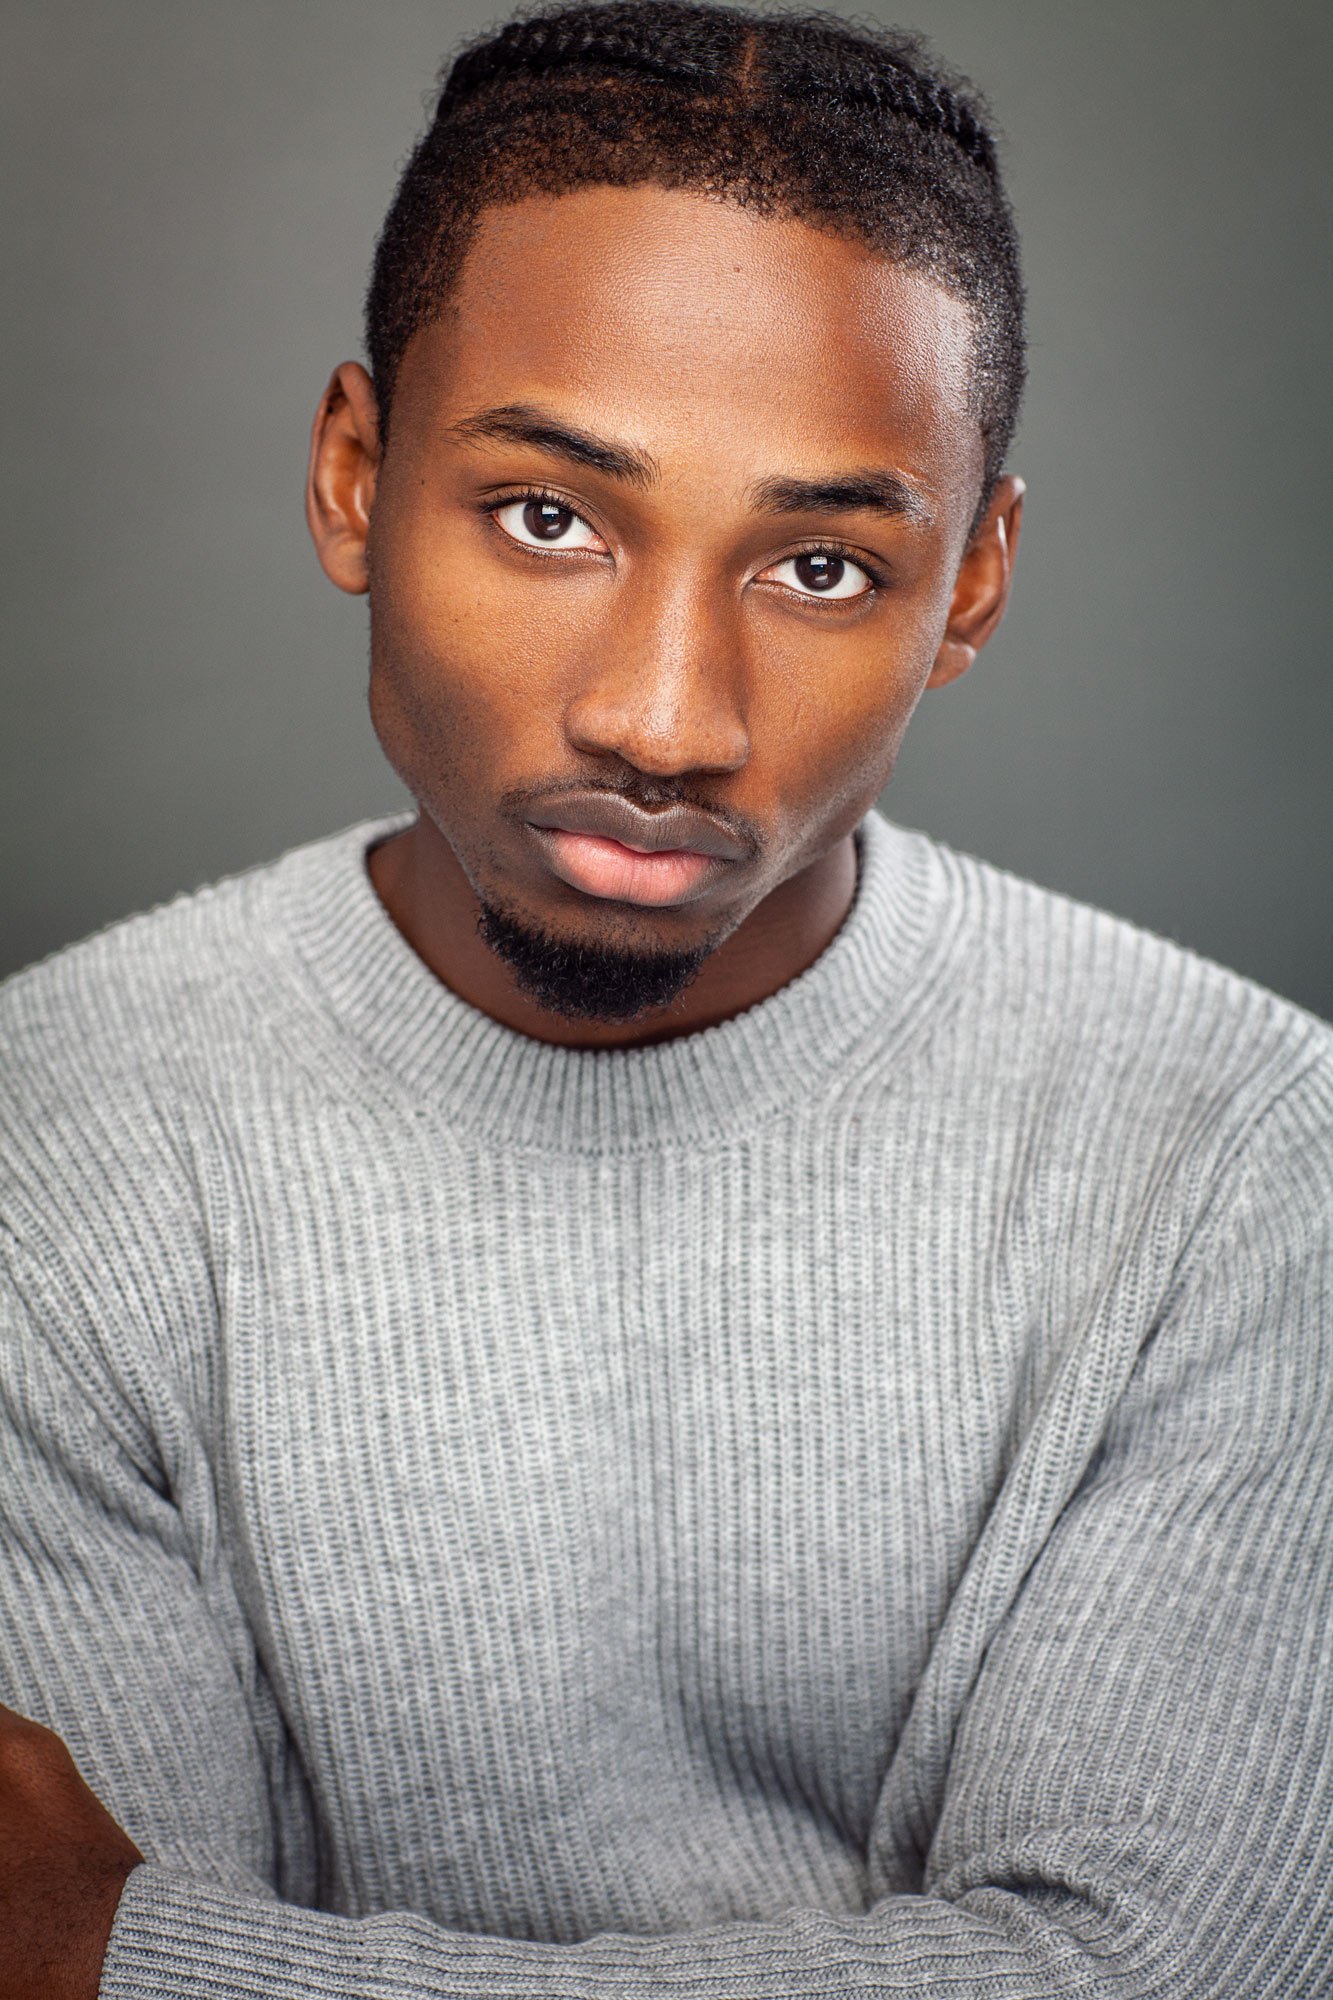 Top headshot photographer for black actors in NYC